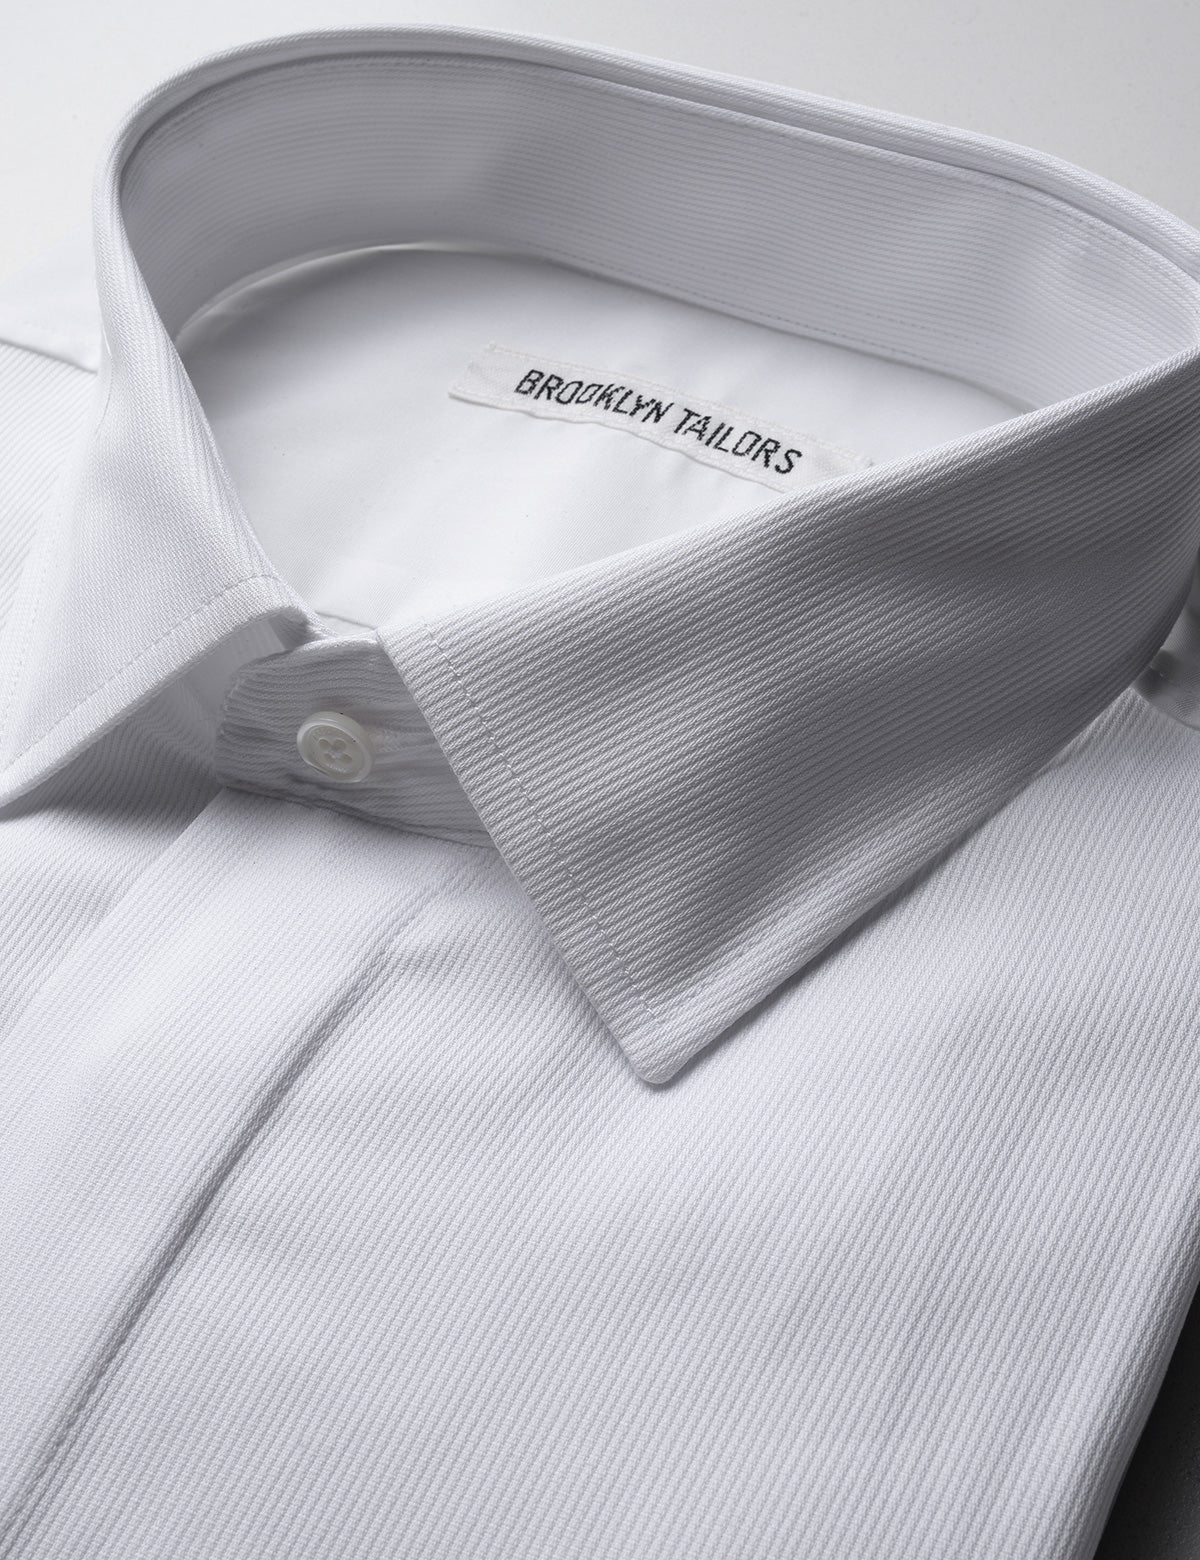 Detail of Brooklyn Tailors French Cuff Tuxedo Shirt With Covered Buttons - Bar Pique showing collar and covered placket